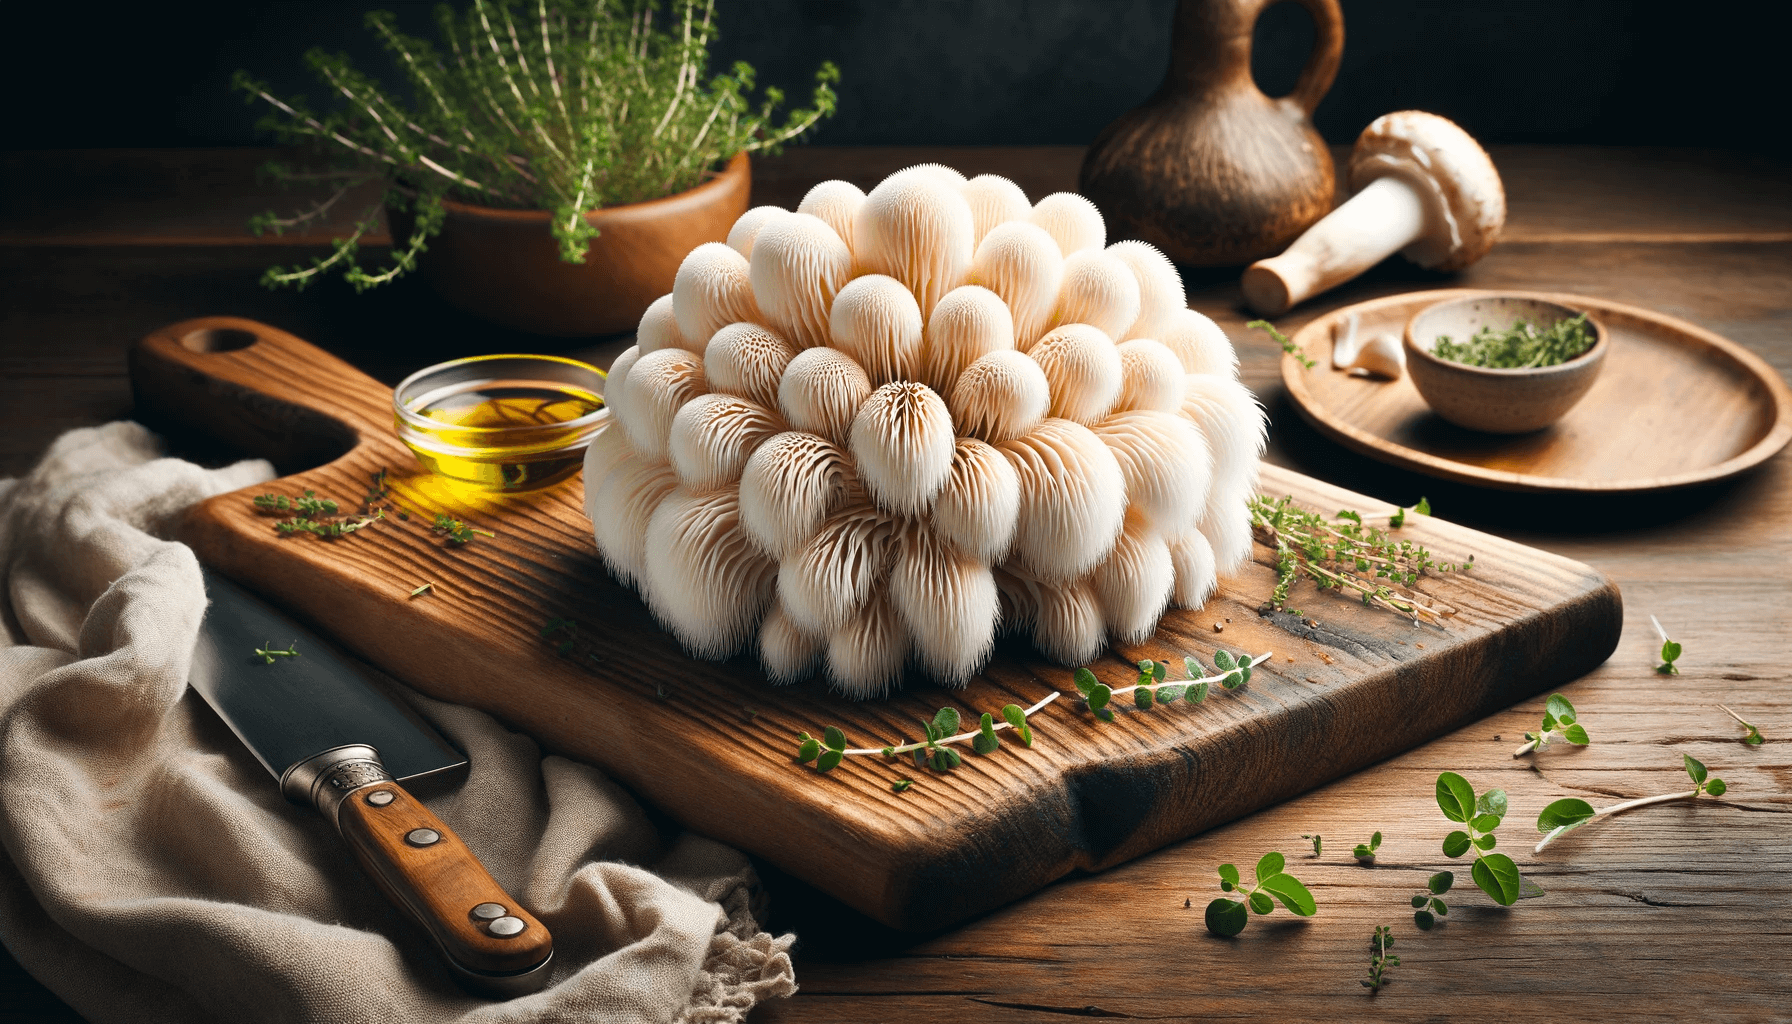 A freshly harvested Lion's Mane mushroom with a highly realistic texture, similar to the provided image, placed on a wooden cutting board in a kitchen.